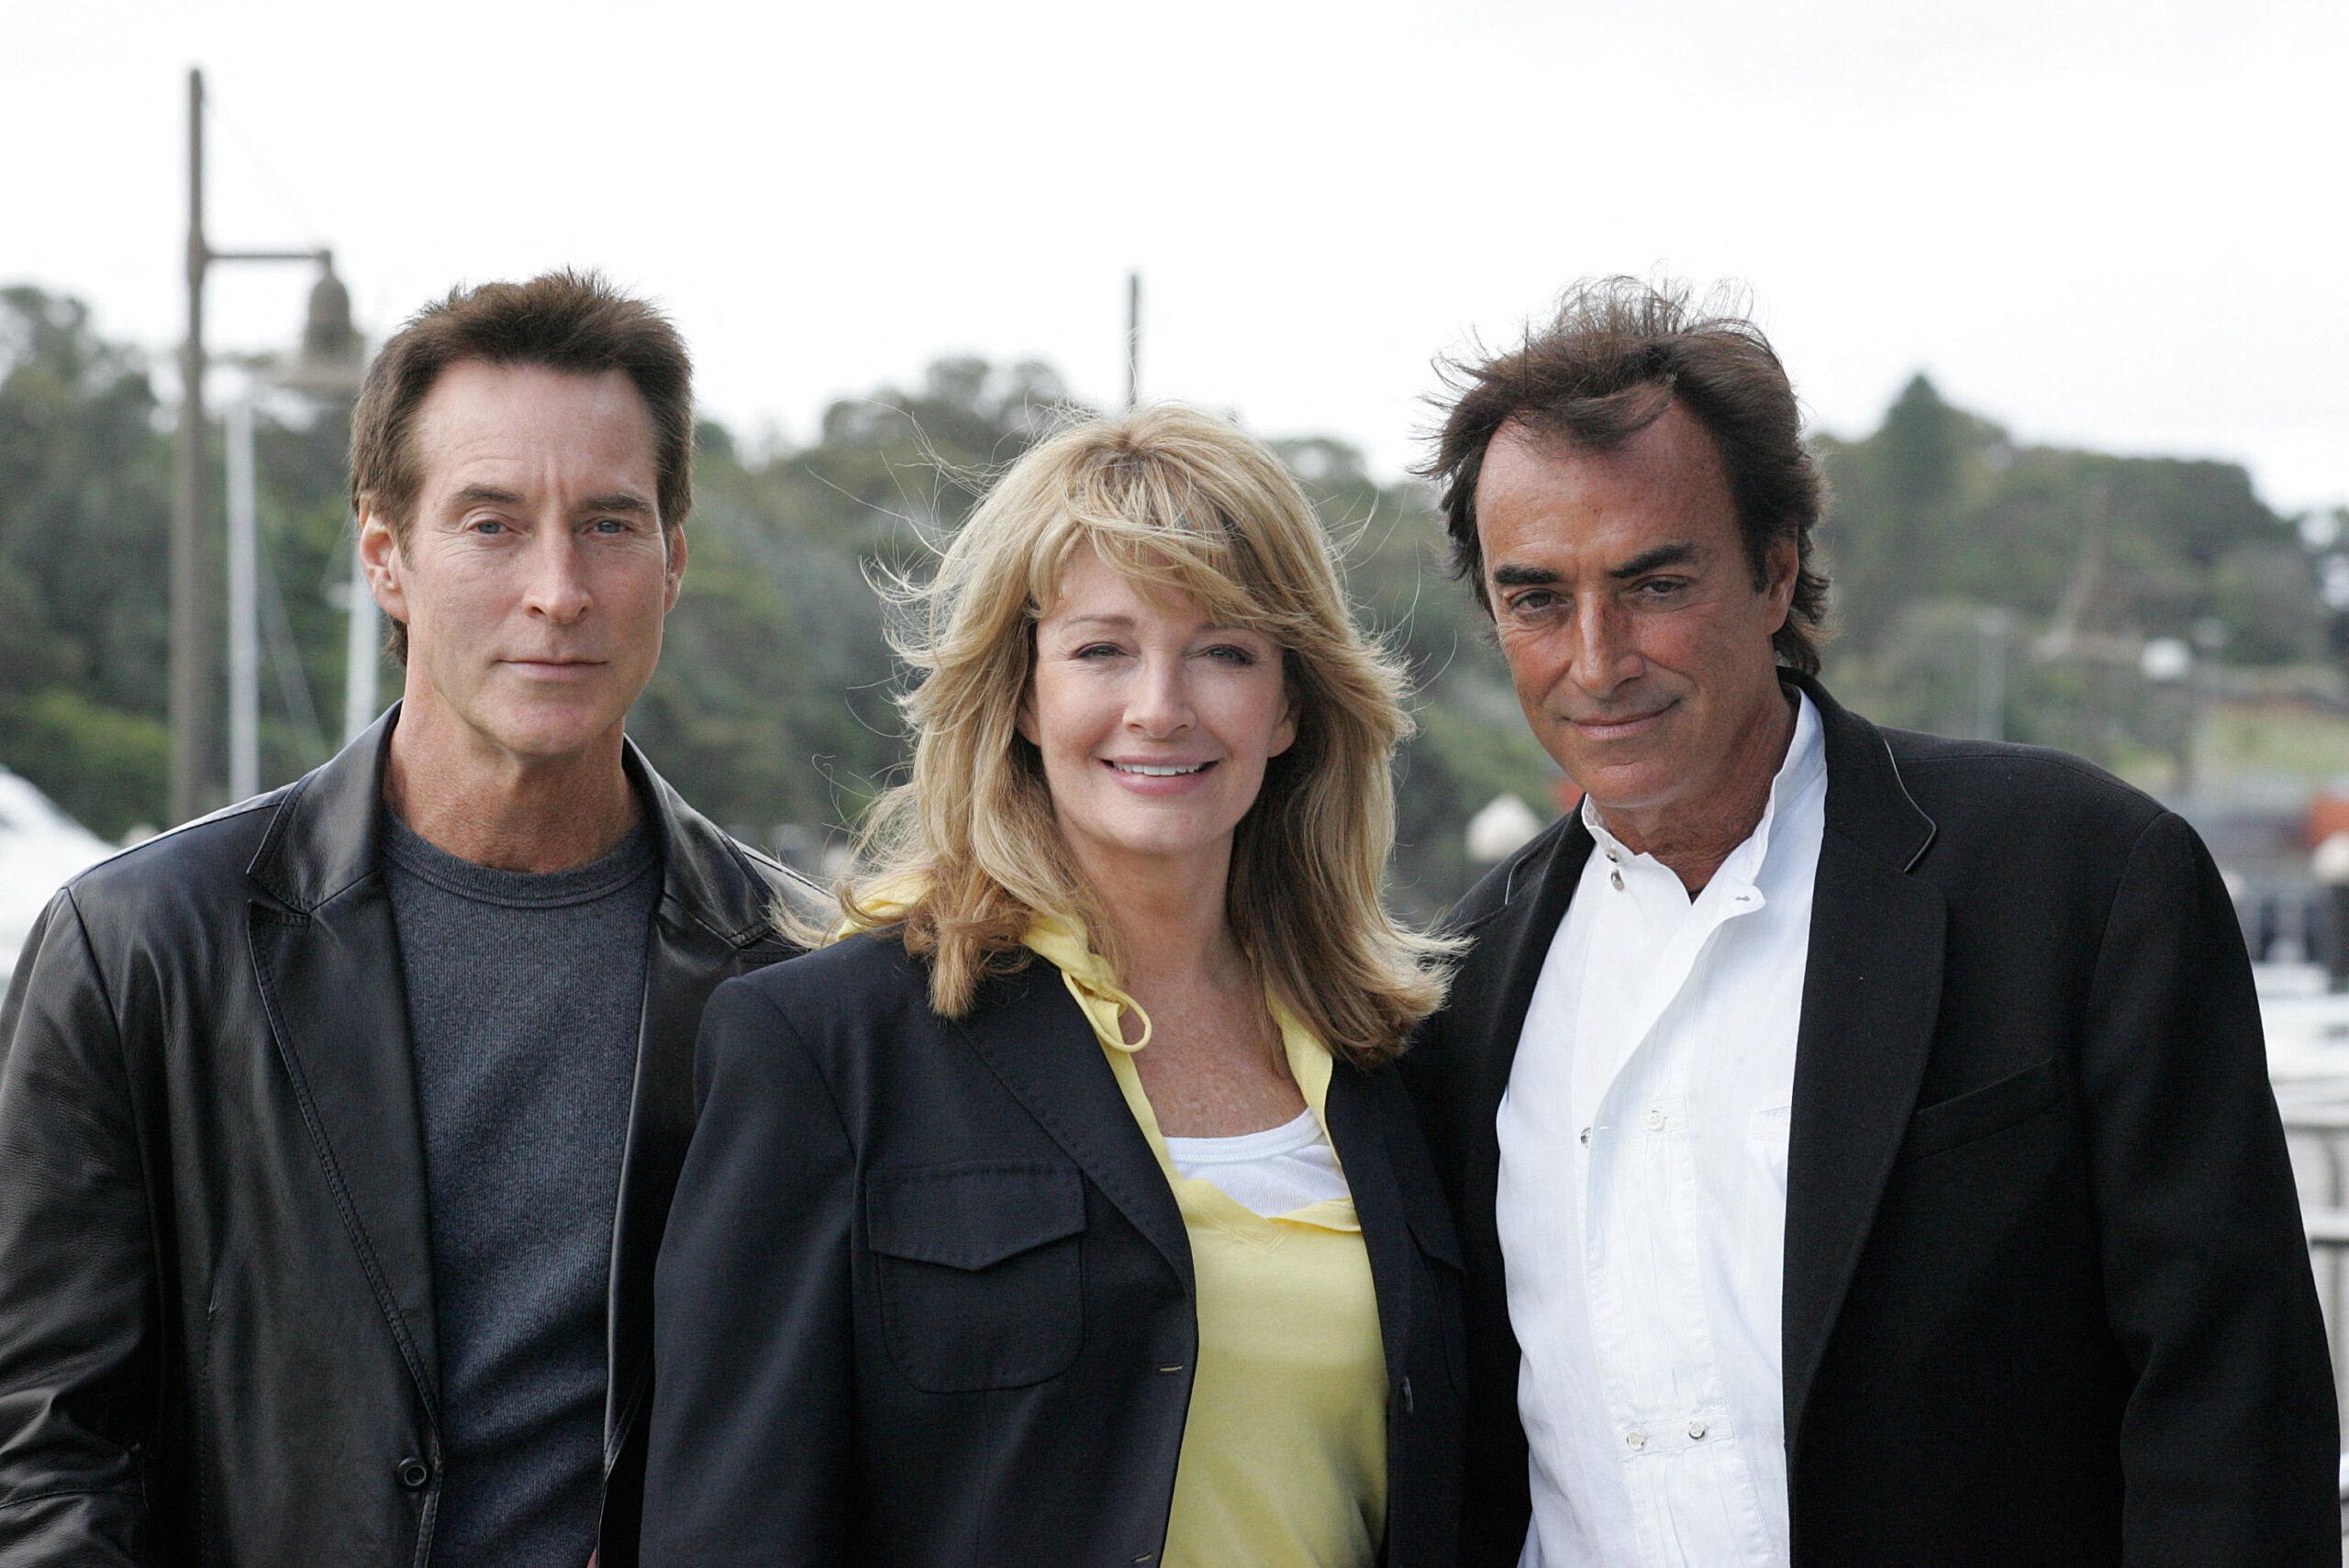 Donald Drake Hogestyn Deidre Hall and Thaao Penghlis DAYS OF OUR LIVES CAST MEMBERS GO FOR LUNCH AT WOOLLOOMOOLOO WHARF SYDNEY